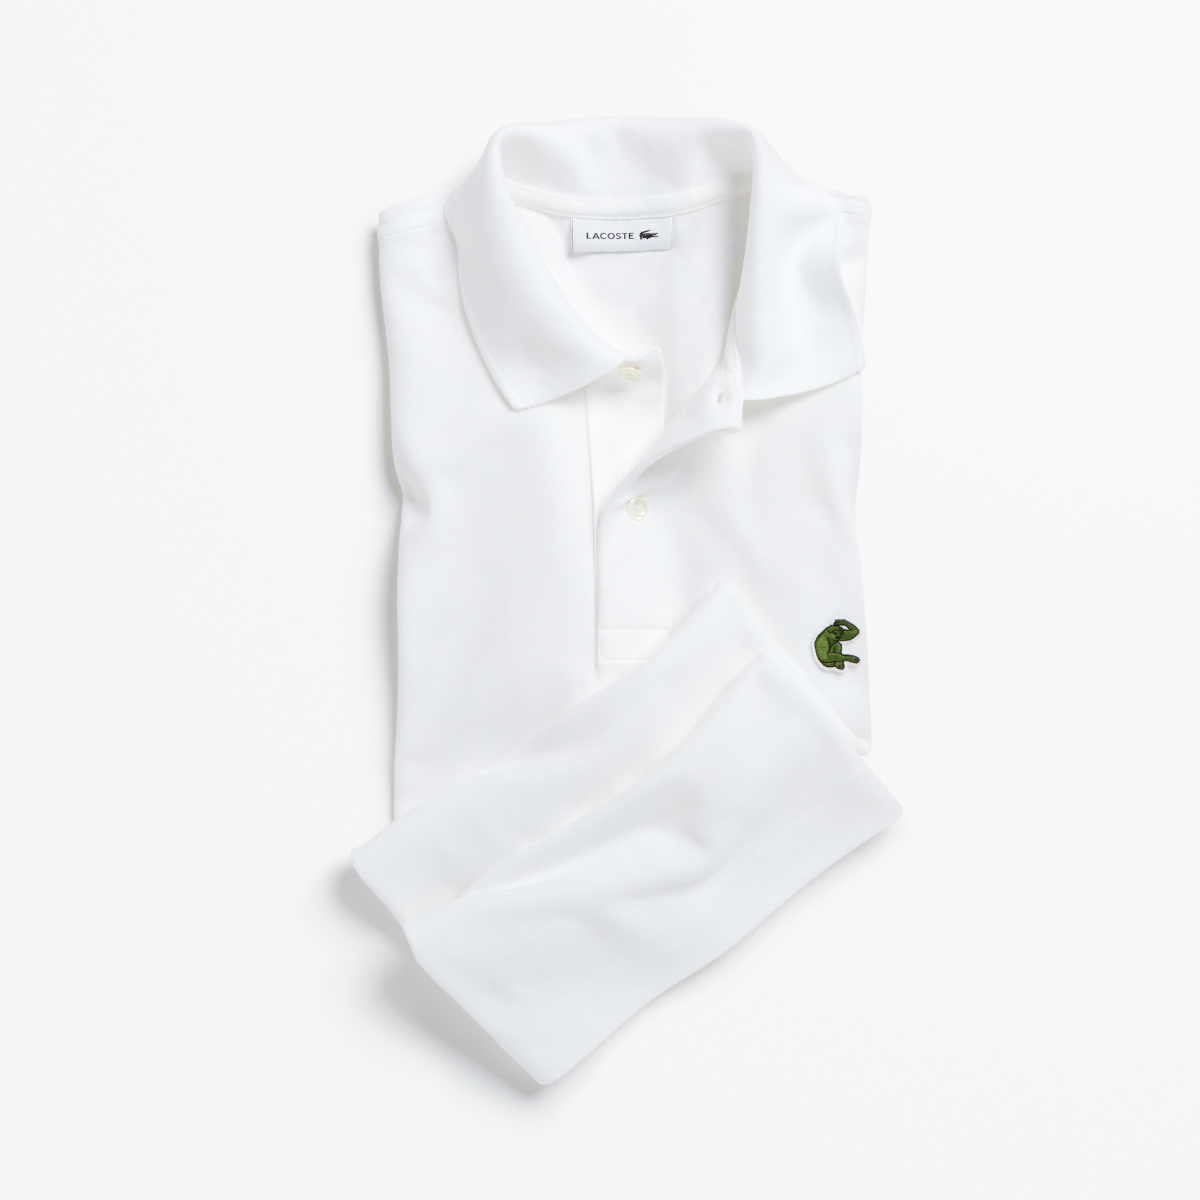 Lacoste Loses its Iconic Crocodile in Favor of Endangered Species for ...